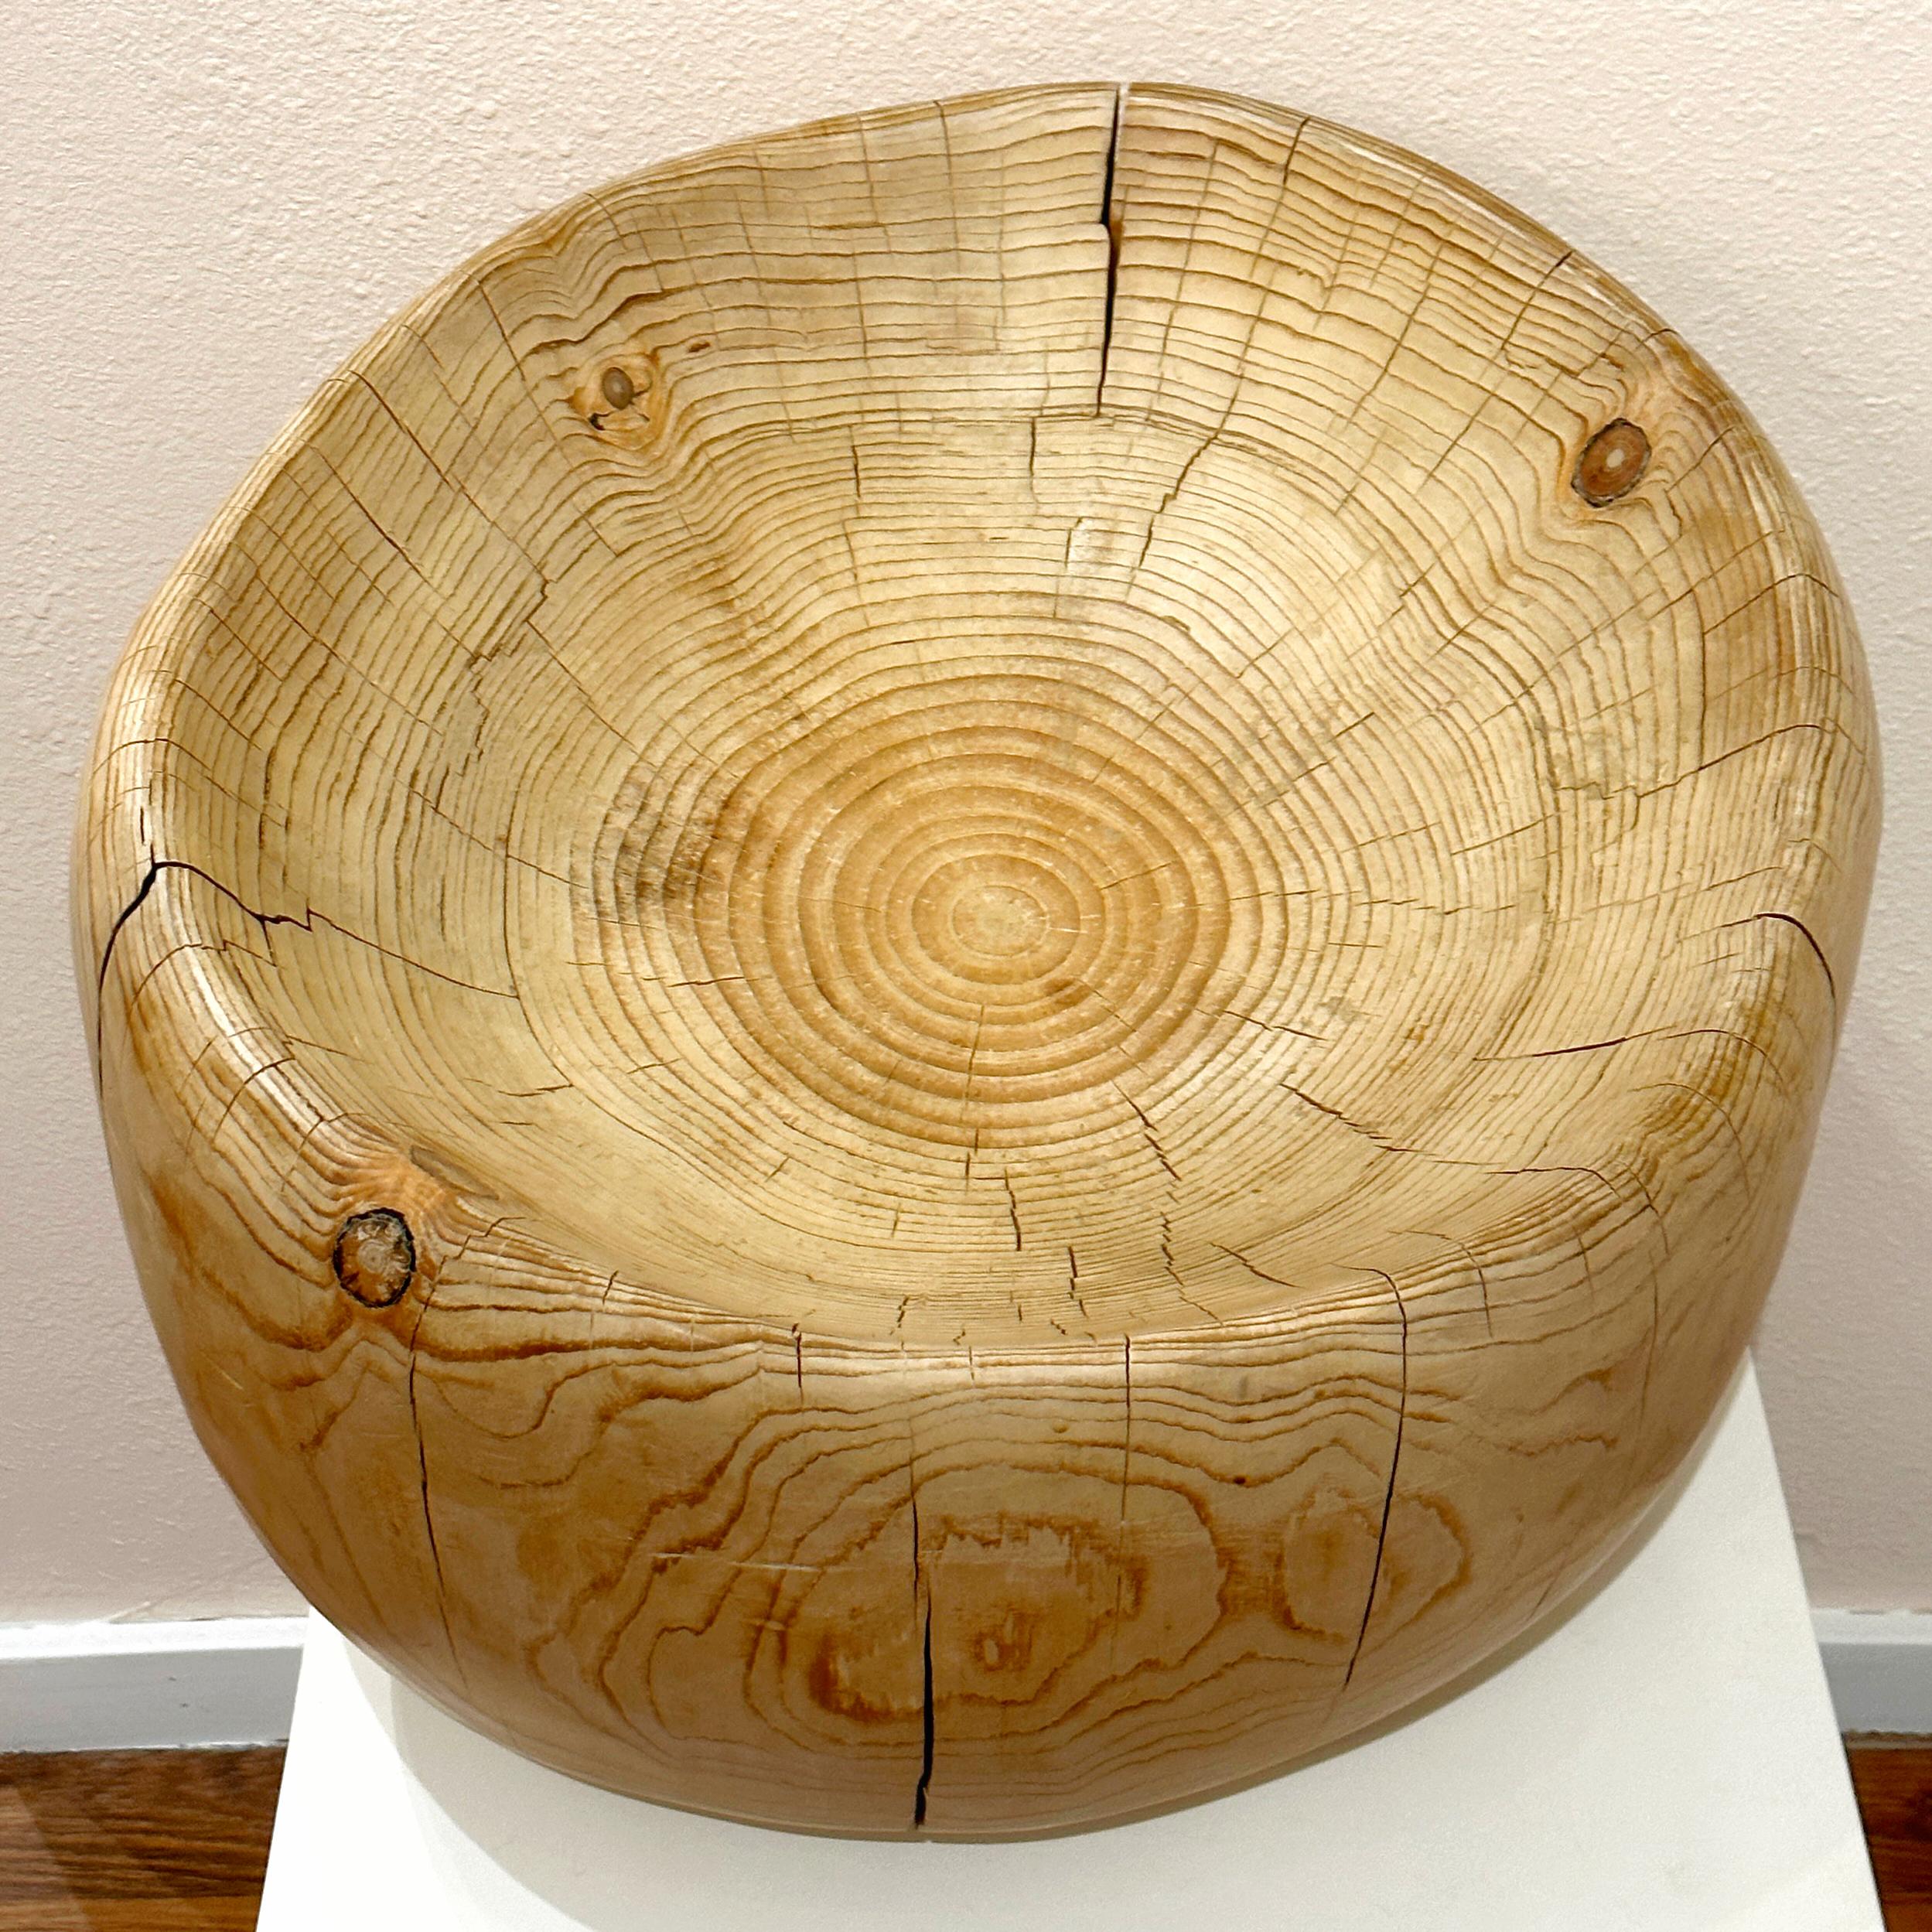 Daniel Pollock Organic Modern Carved Pine Wood Stool or Sculptural Object, 1995 For Sale 1